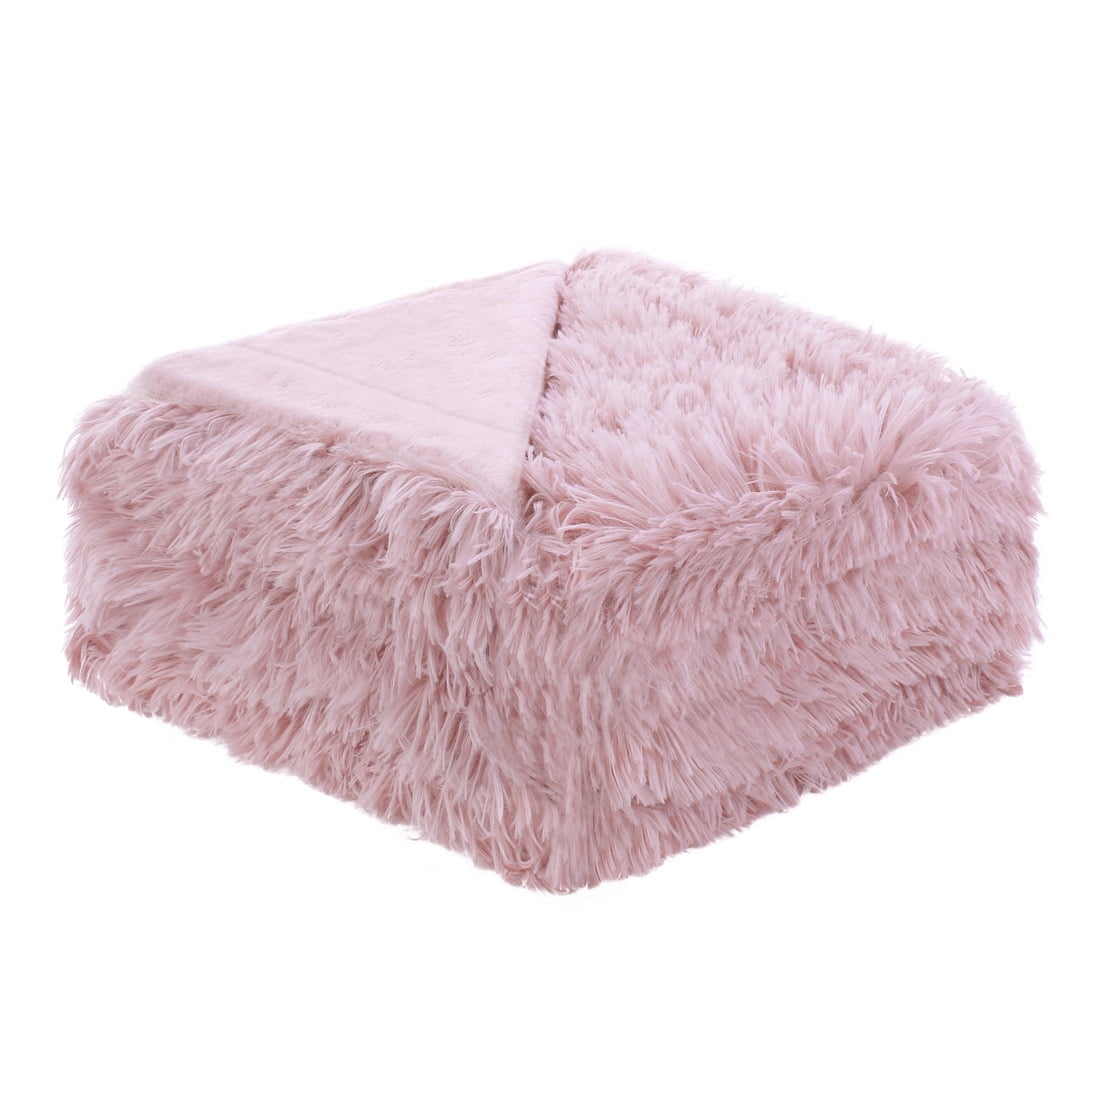 Moslion Soft Cozy Throw Blanket Funny Cartoon Pig Face Pink Fuzzy Couch/Bed Blanket for Adult/Youth Polyester 60 X 80 Inches Home/Travel/Camping Applicable